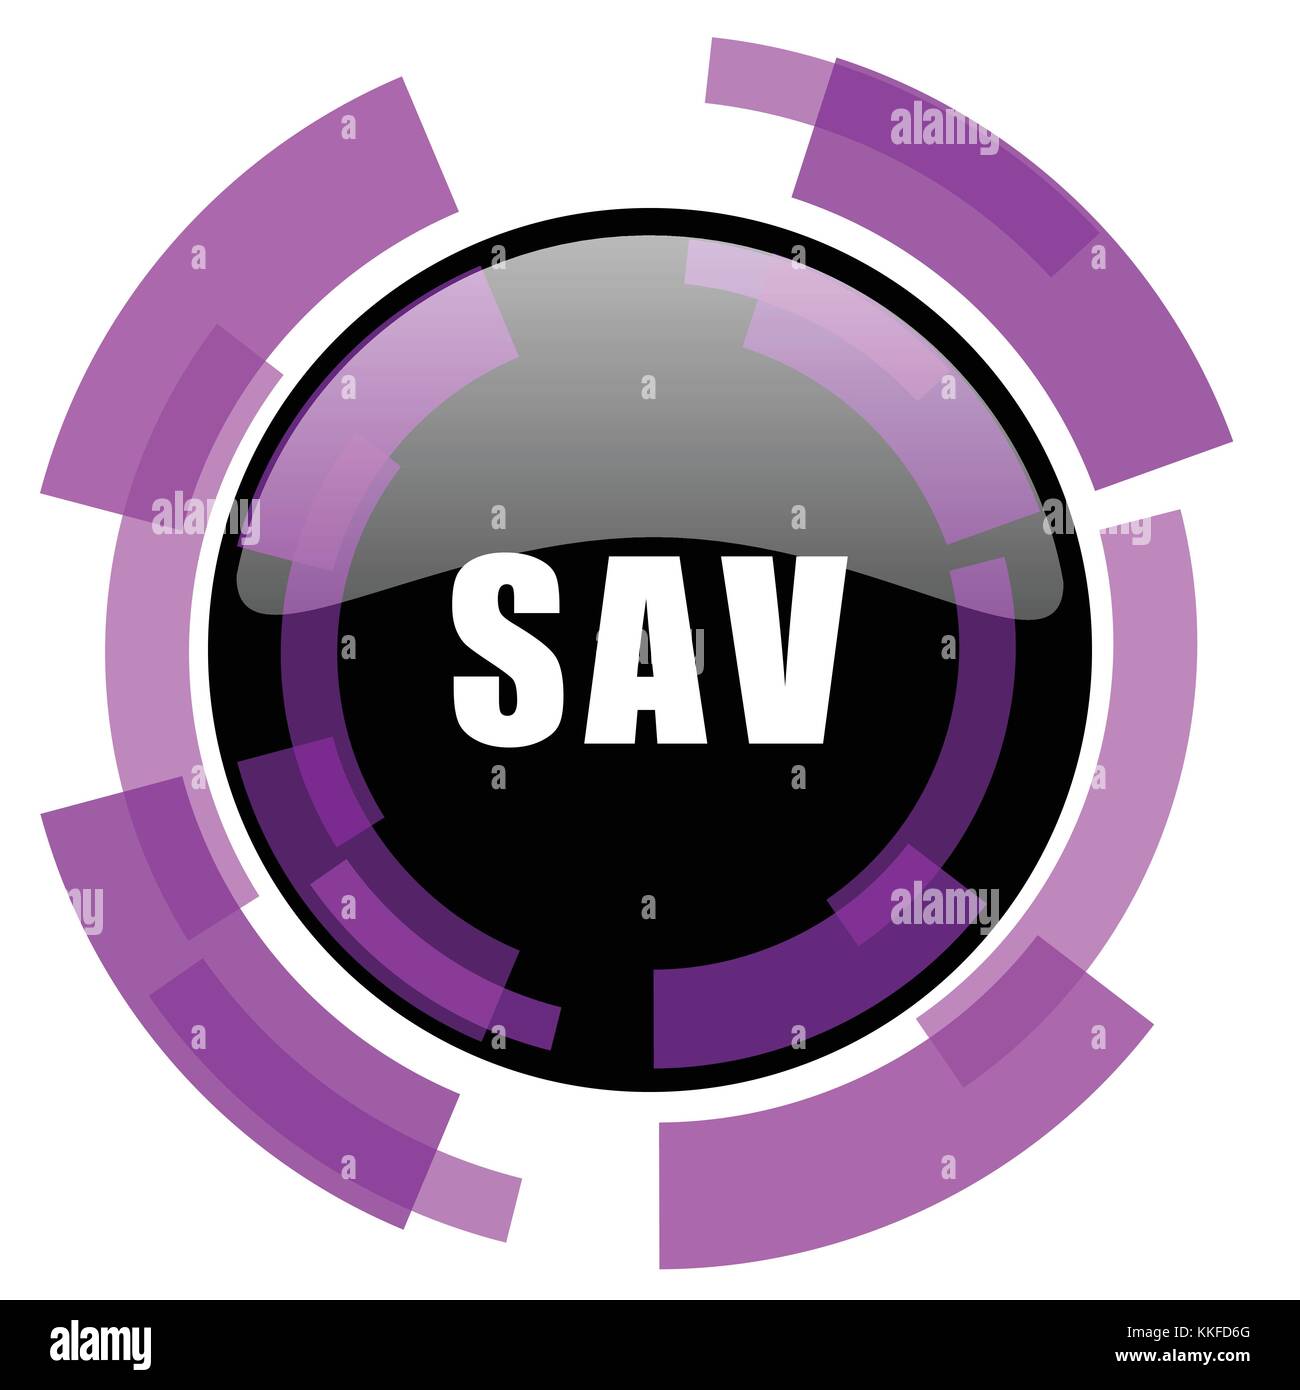 Sav pink violet modern design vector web and smartphone icon. Round button in eps 10 isolated on white background. Stock Vector